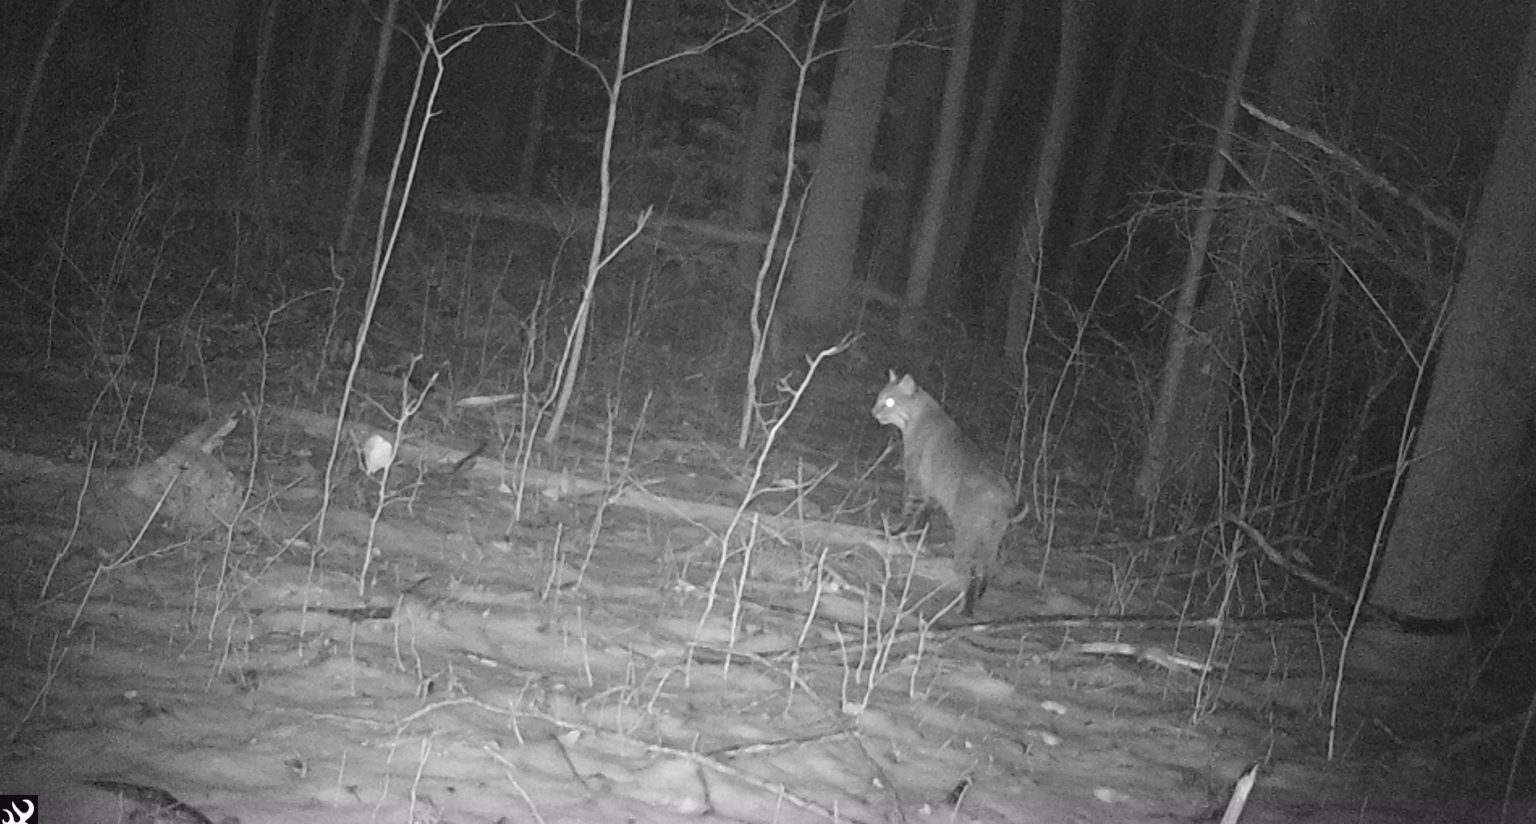 Bobcat in the woods at night